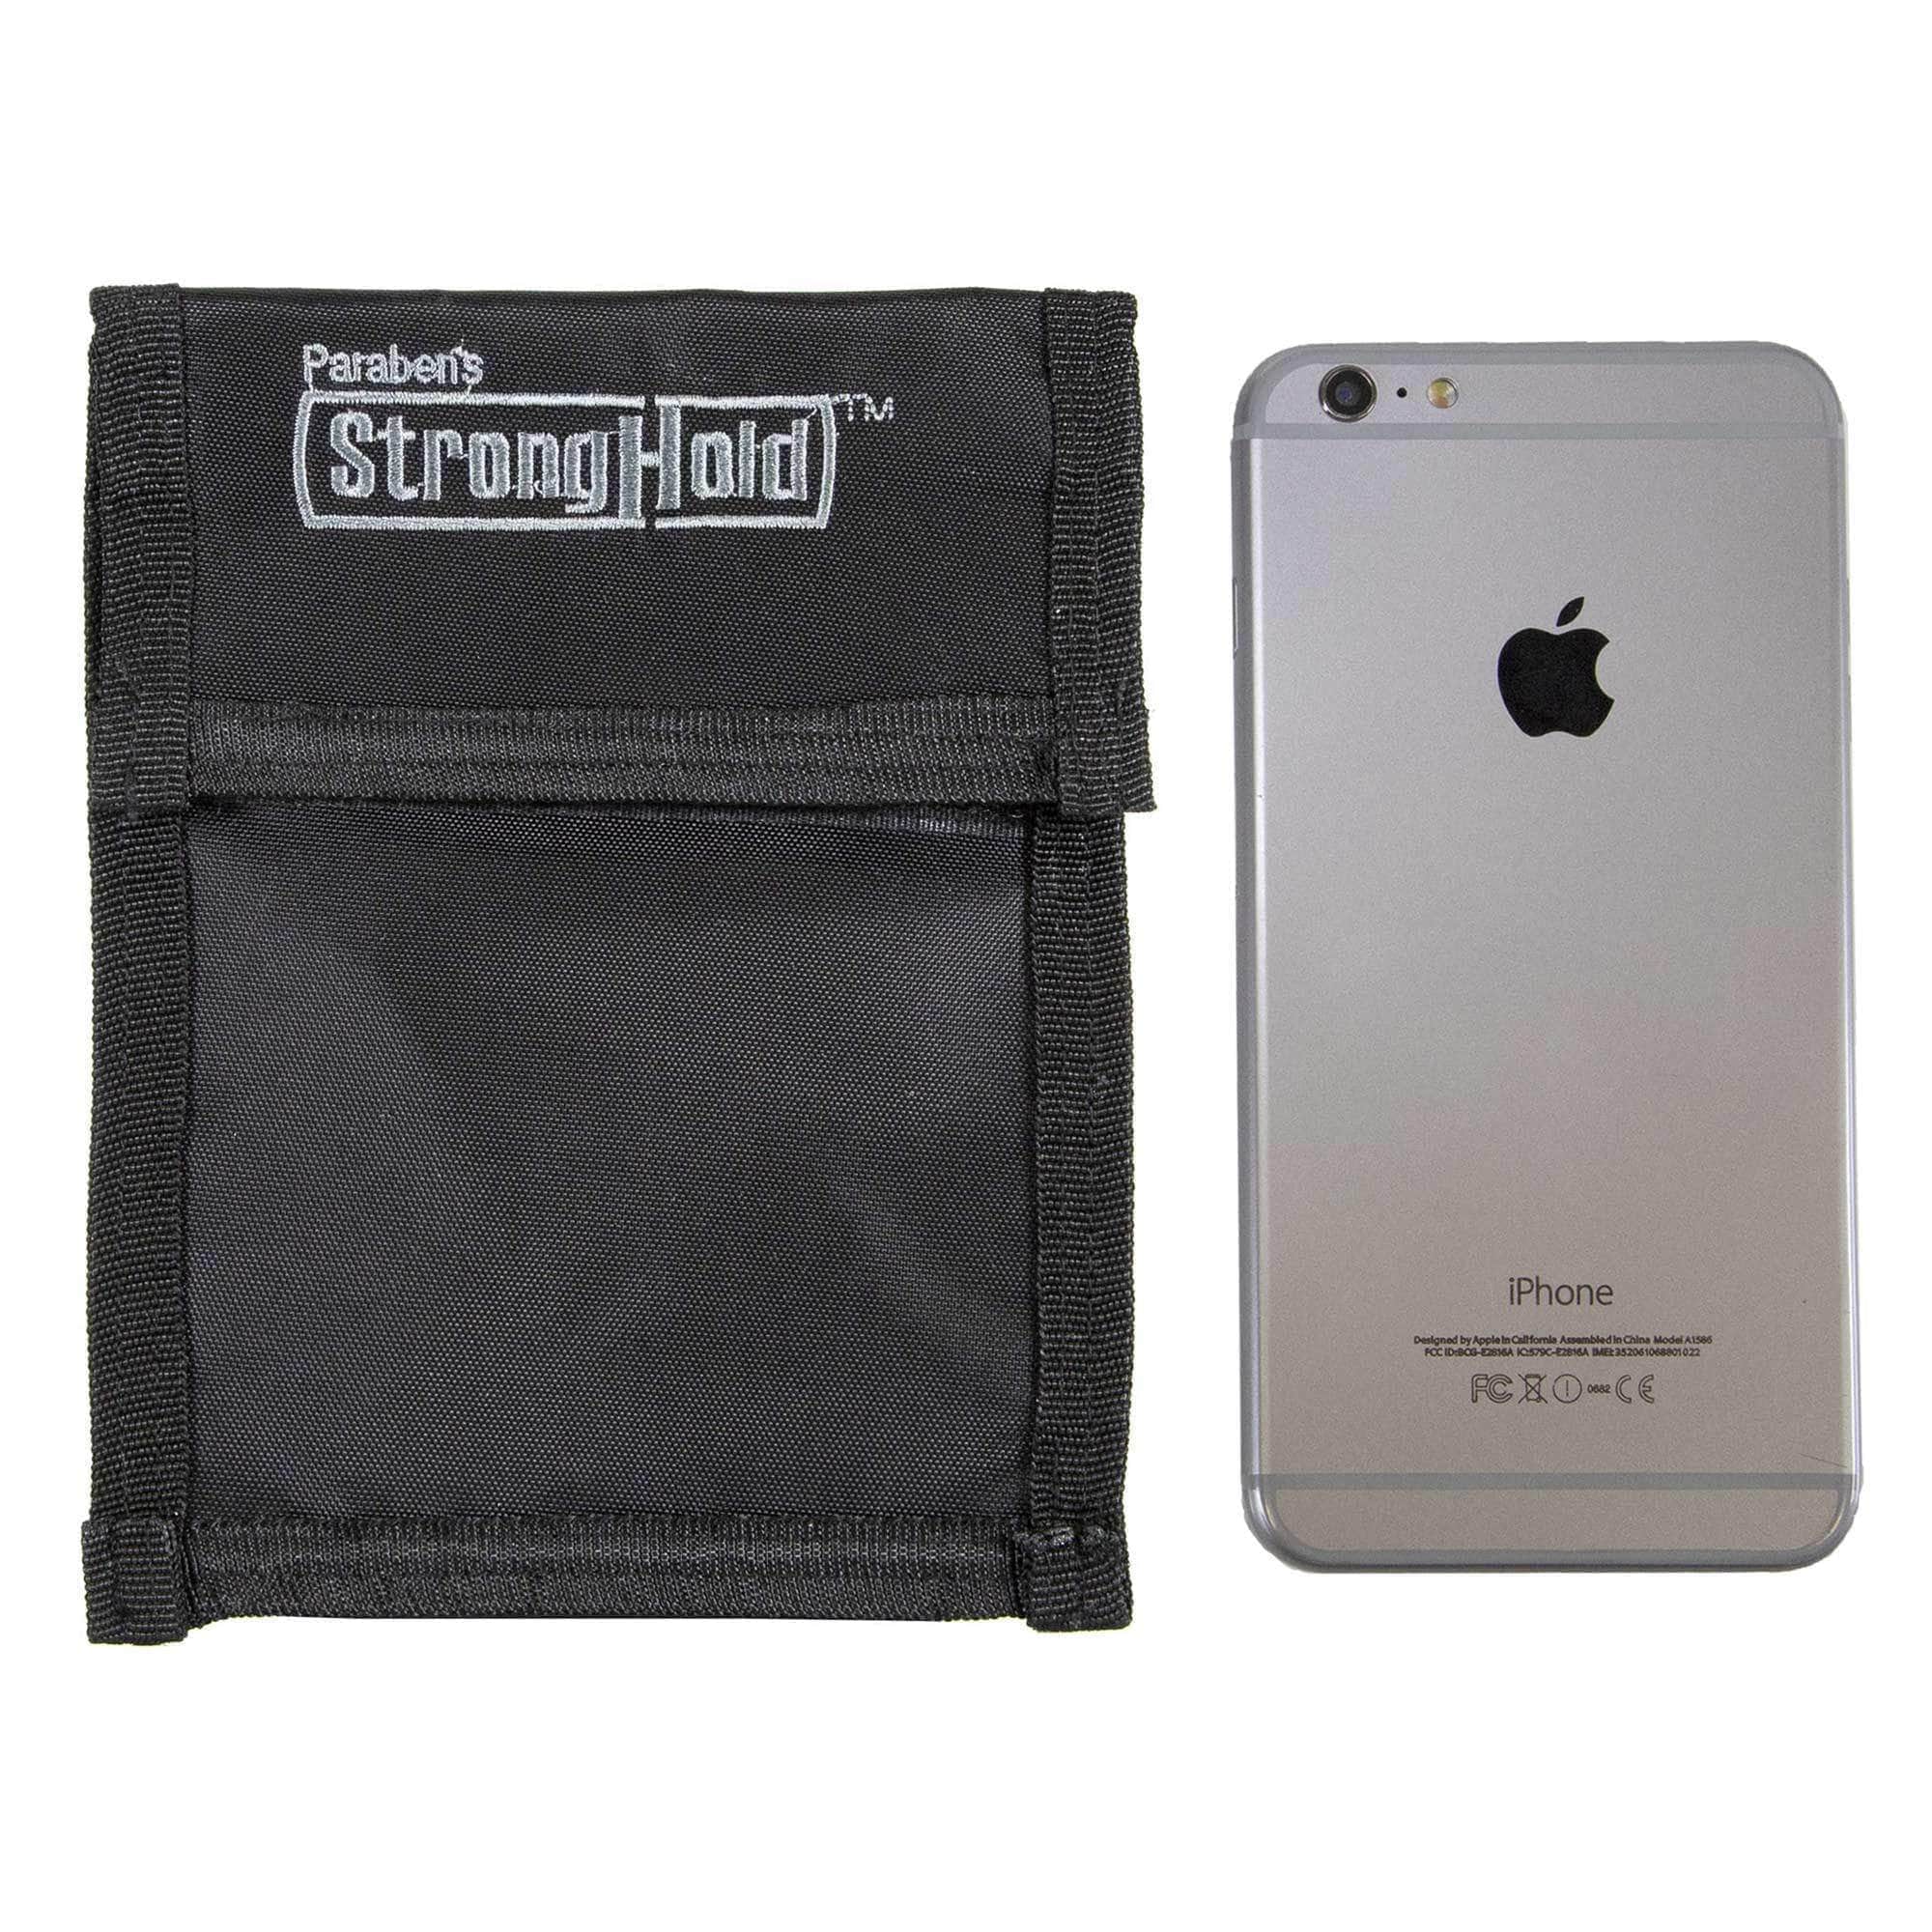 Small Stronghold Cell Phone Bag 5x6 by ID Stronghold